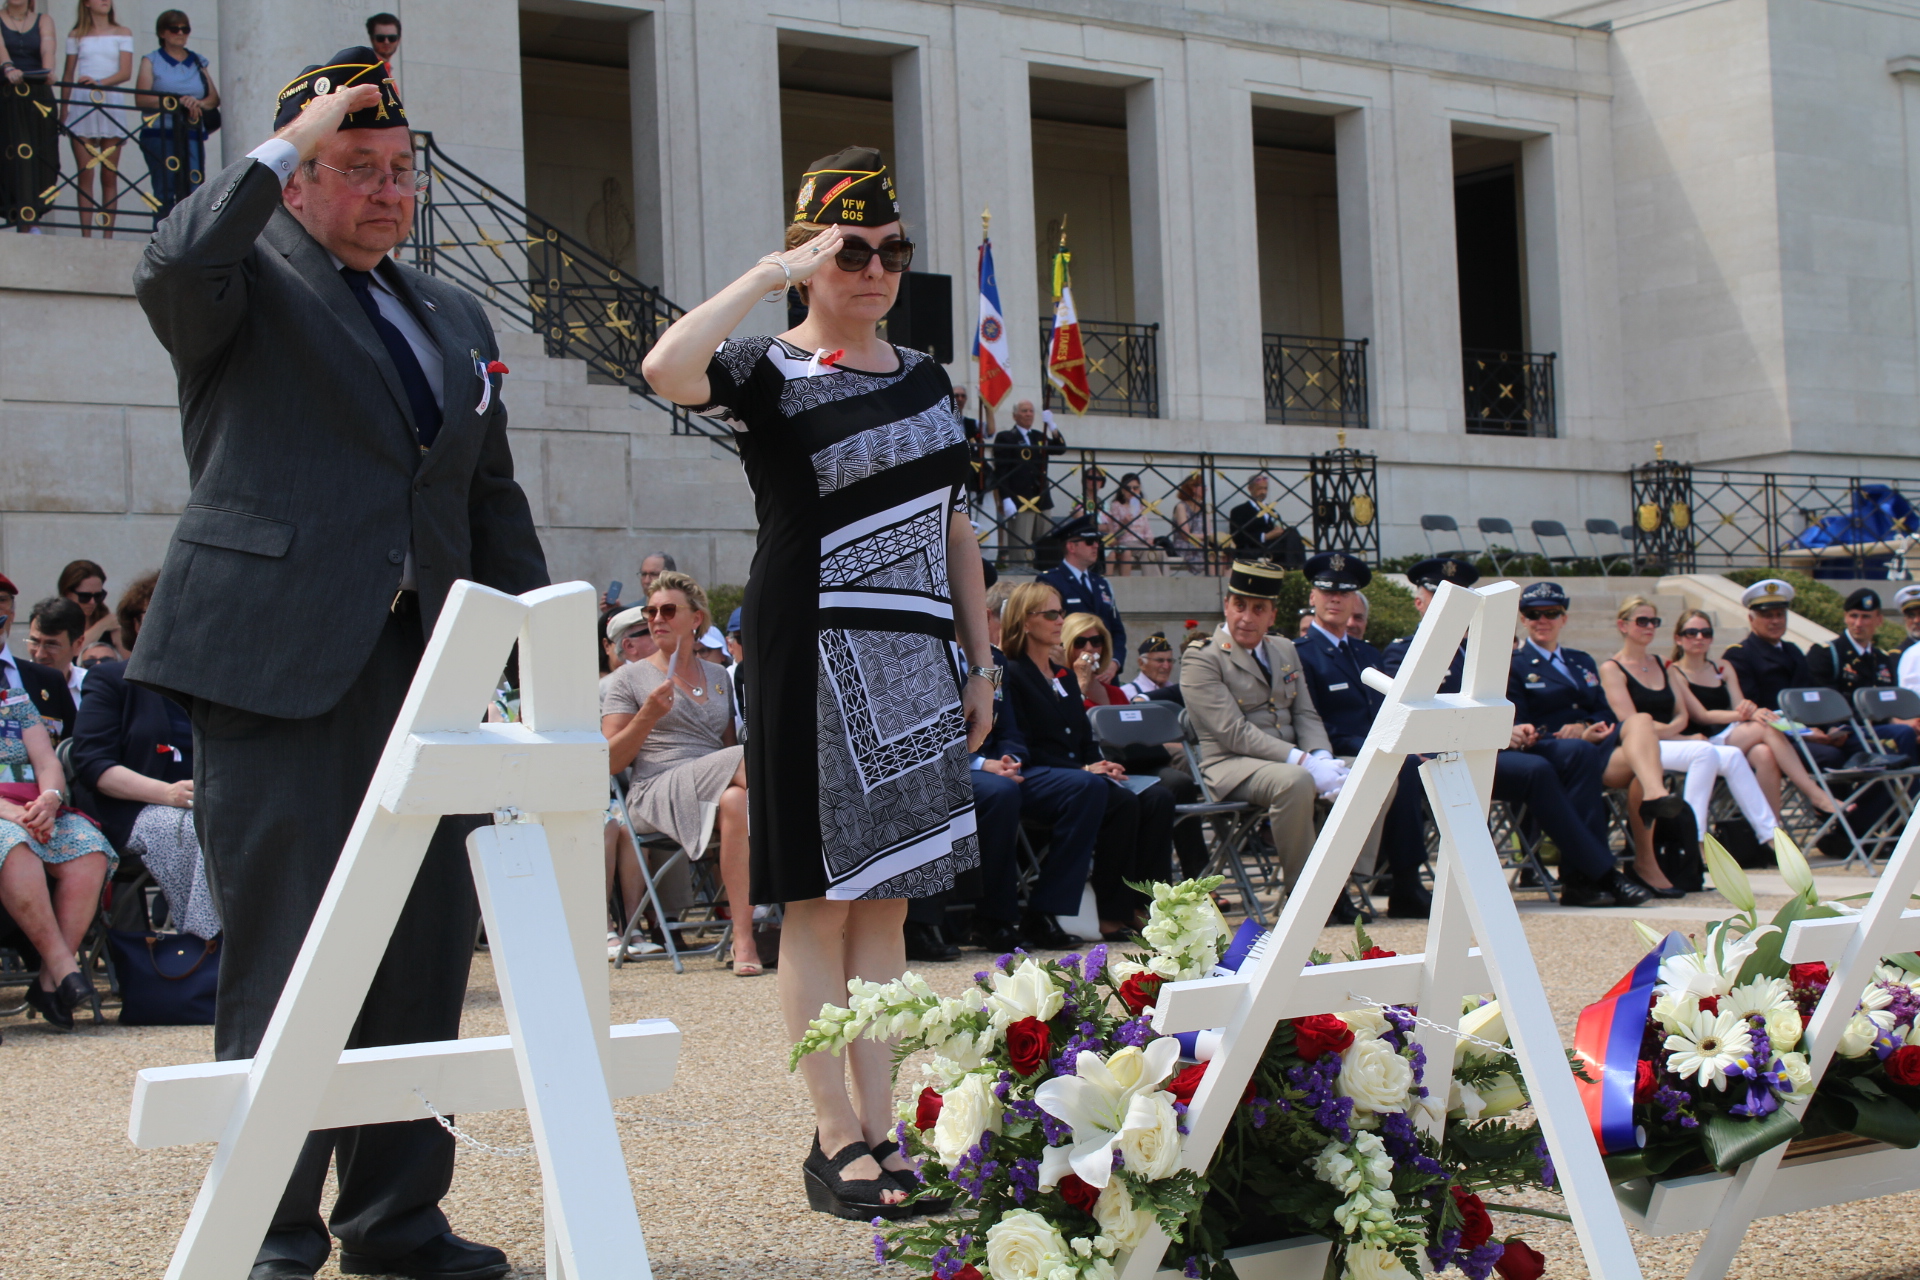 A man and woman salute after laying a wreath.